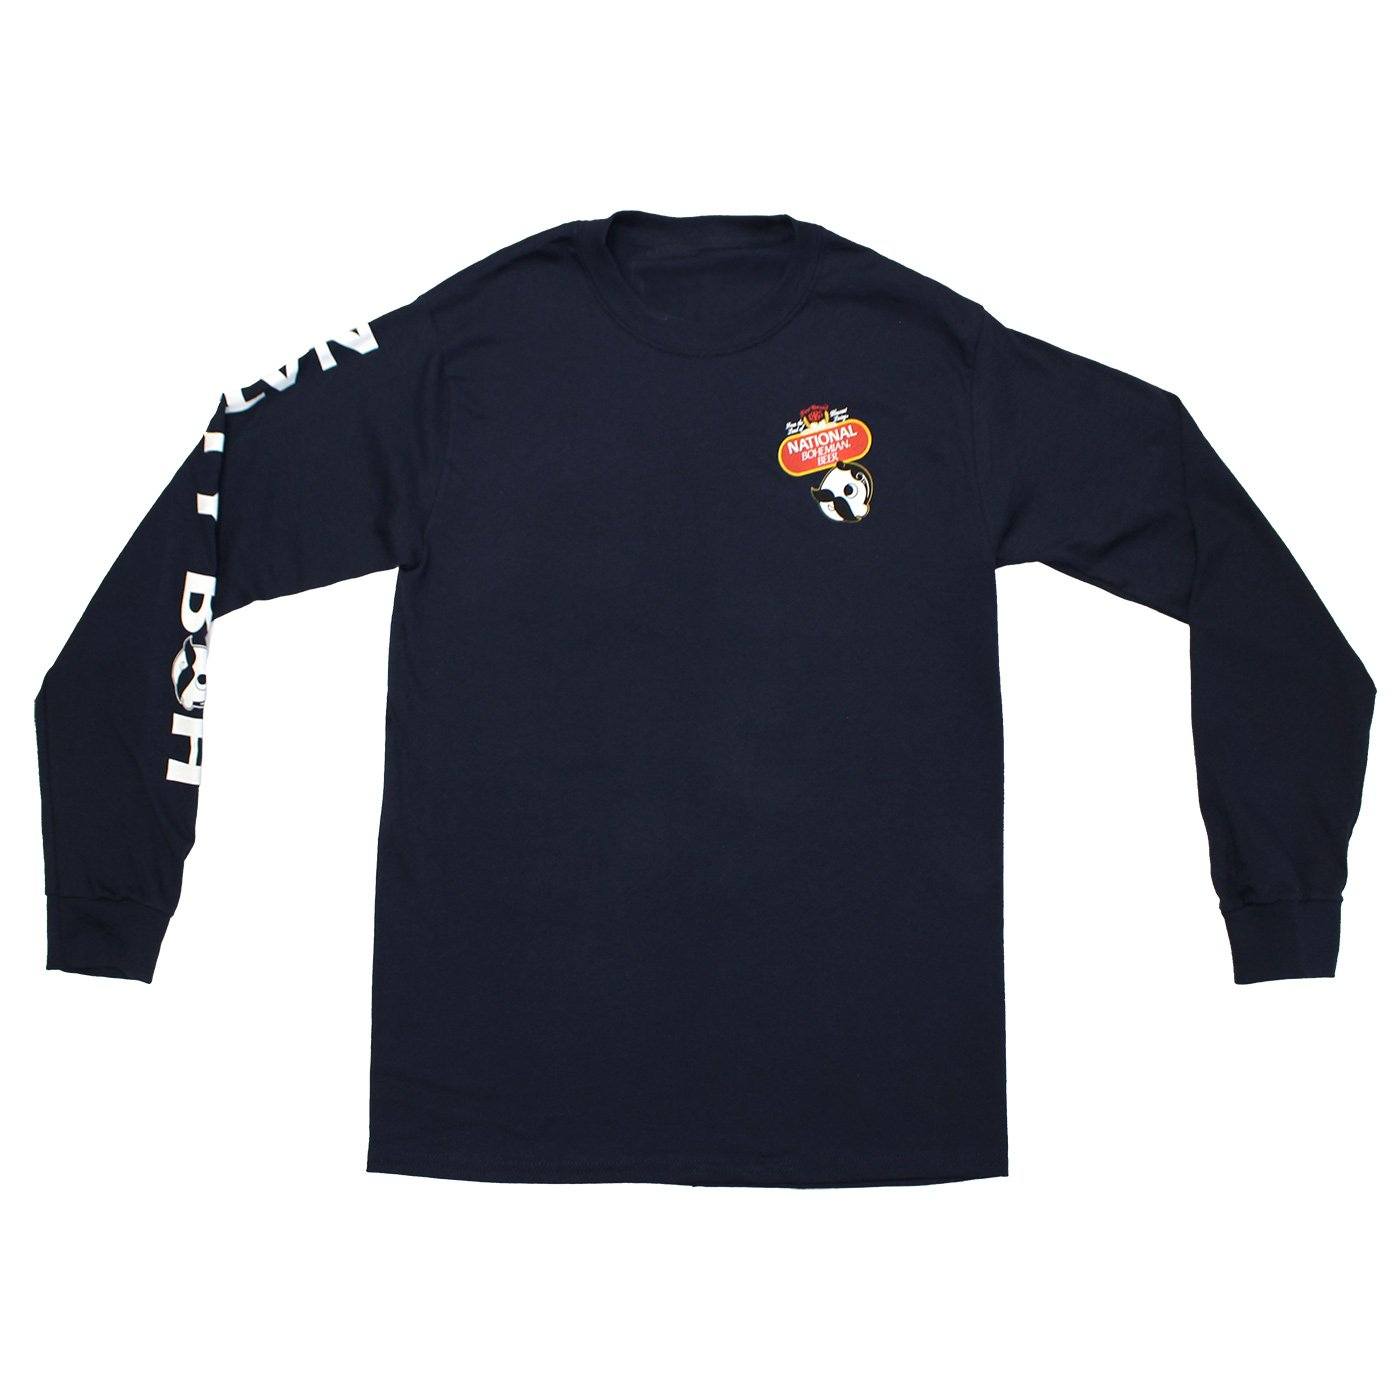 National Bohemian Beer Signature Classic (Navy) / Long Sleeve Shirt - Route One Apparel